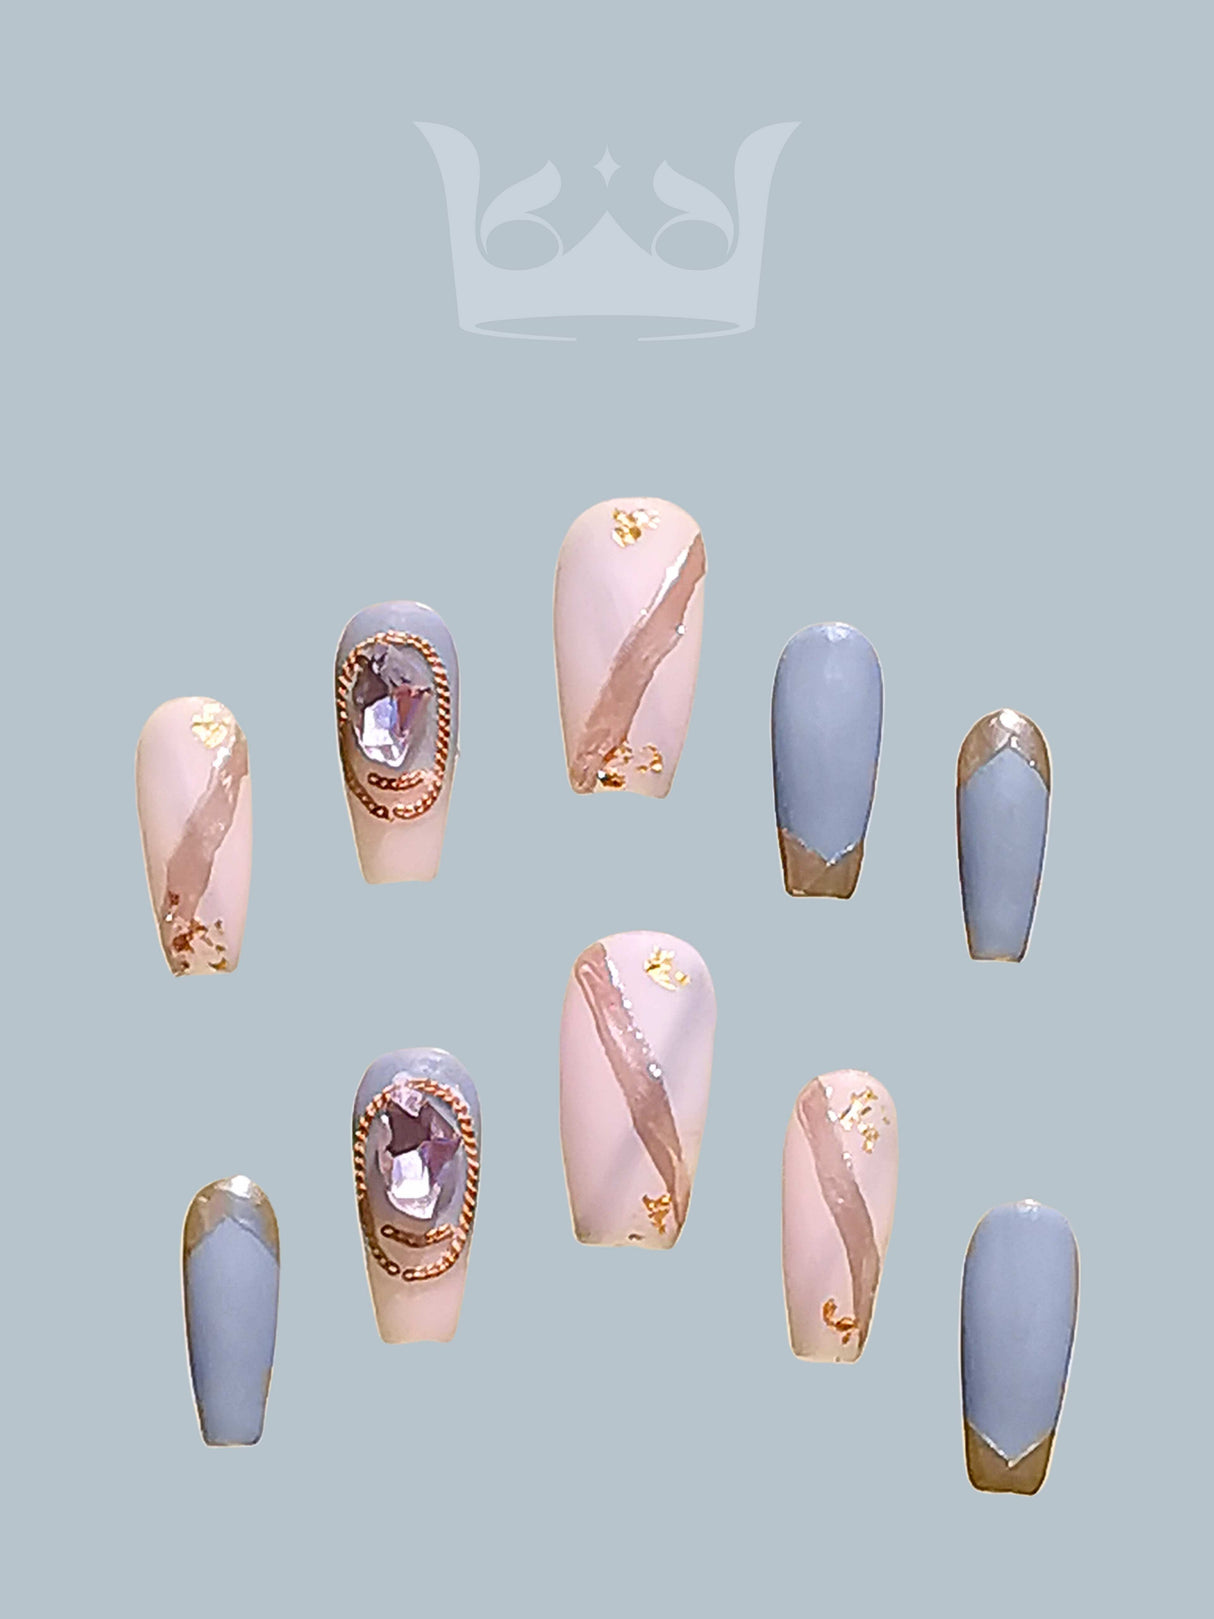 Feminine and elegant nails with pink and blue colors, gold foil accents, and diamonds.  for special occasions or fashion statements. 